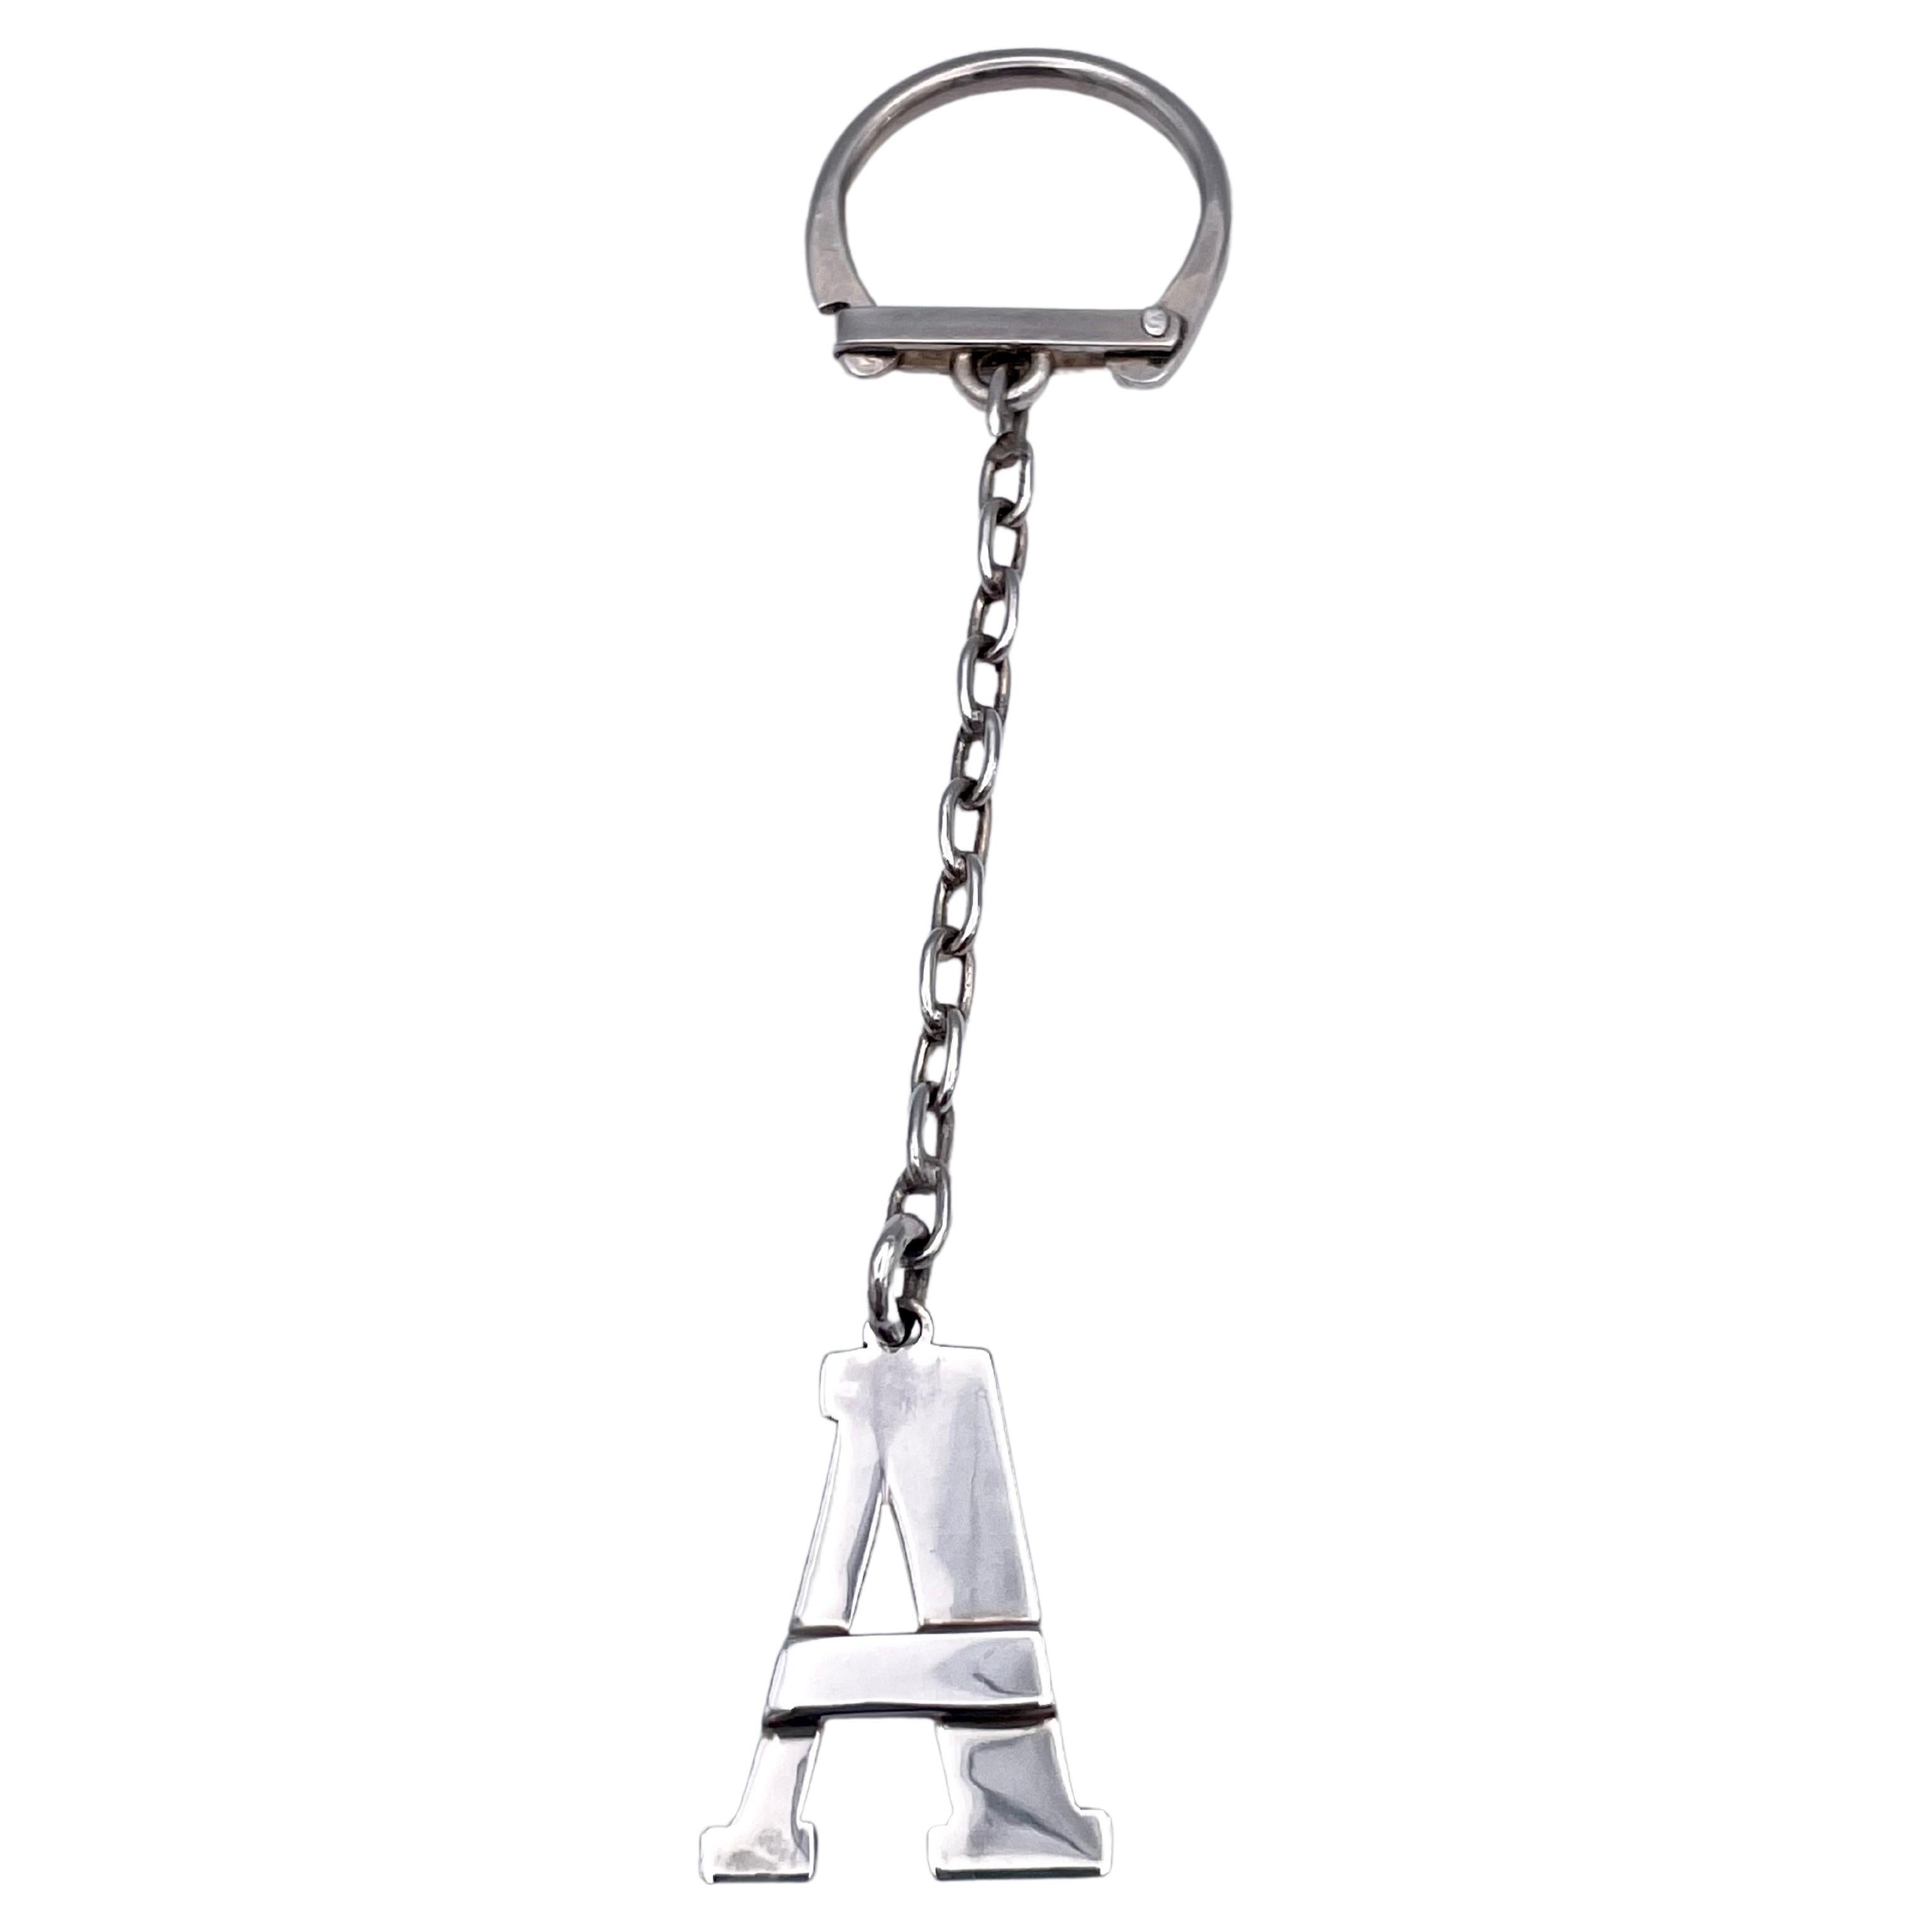 Sterling silver key chain.  Set with a bold Capital 